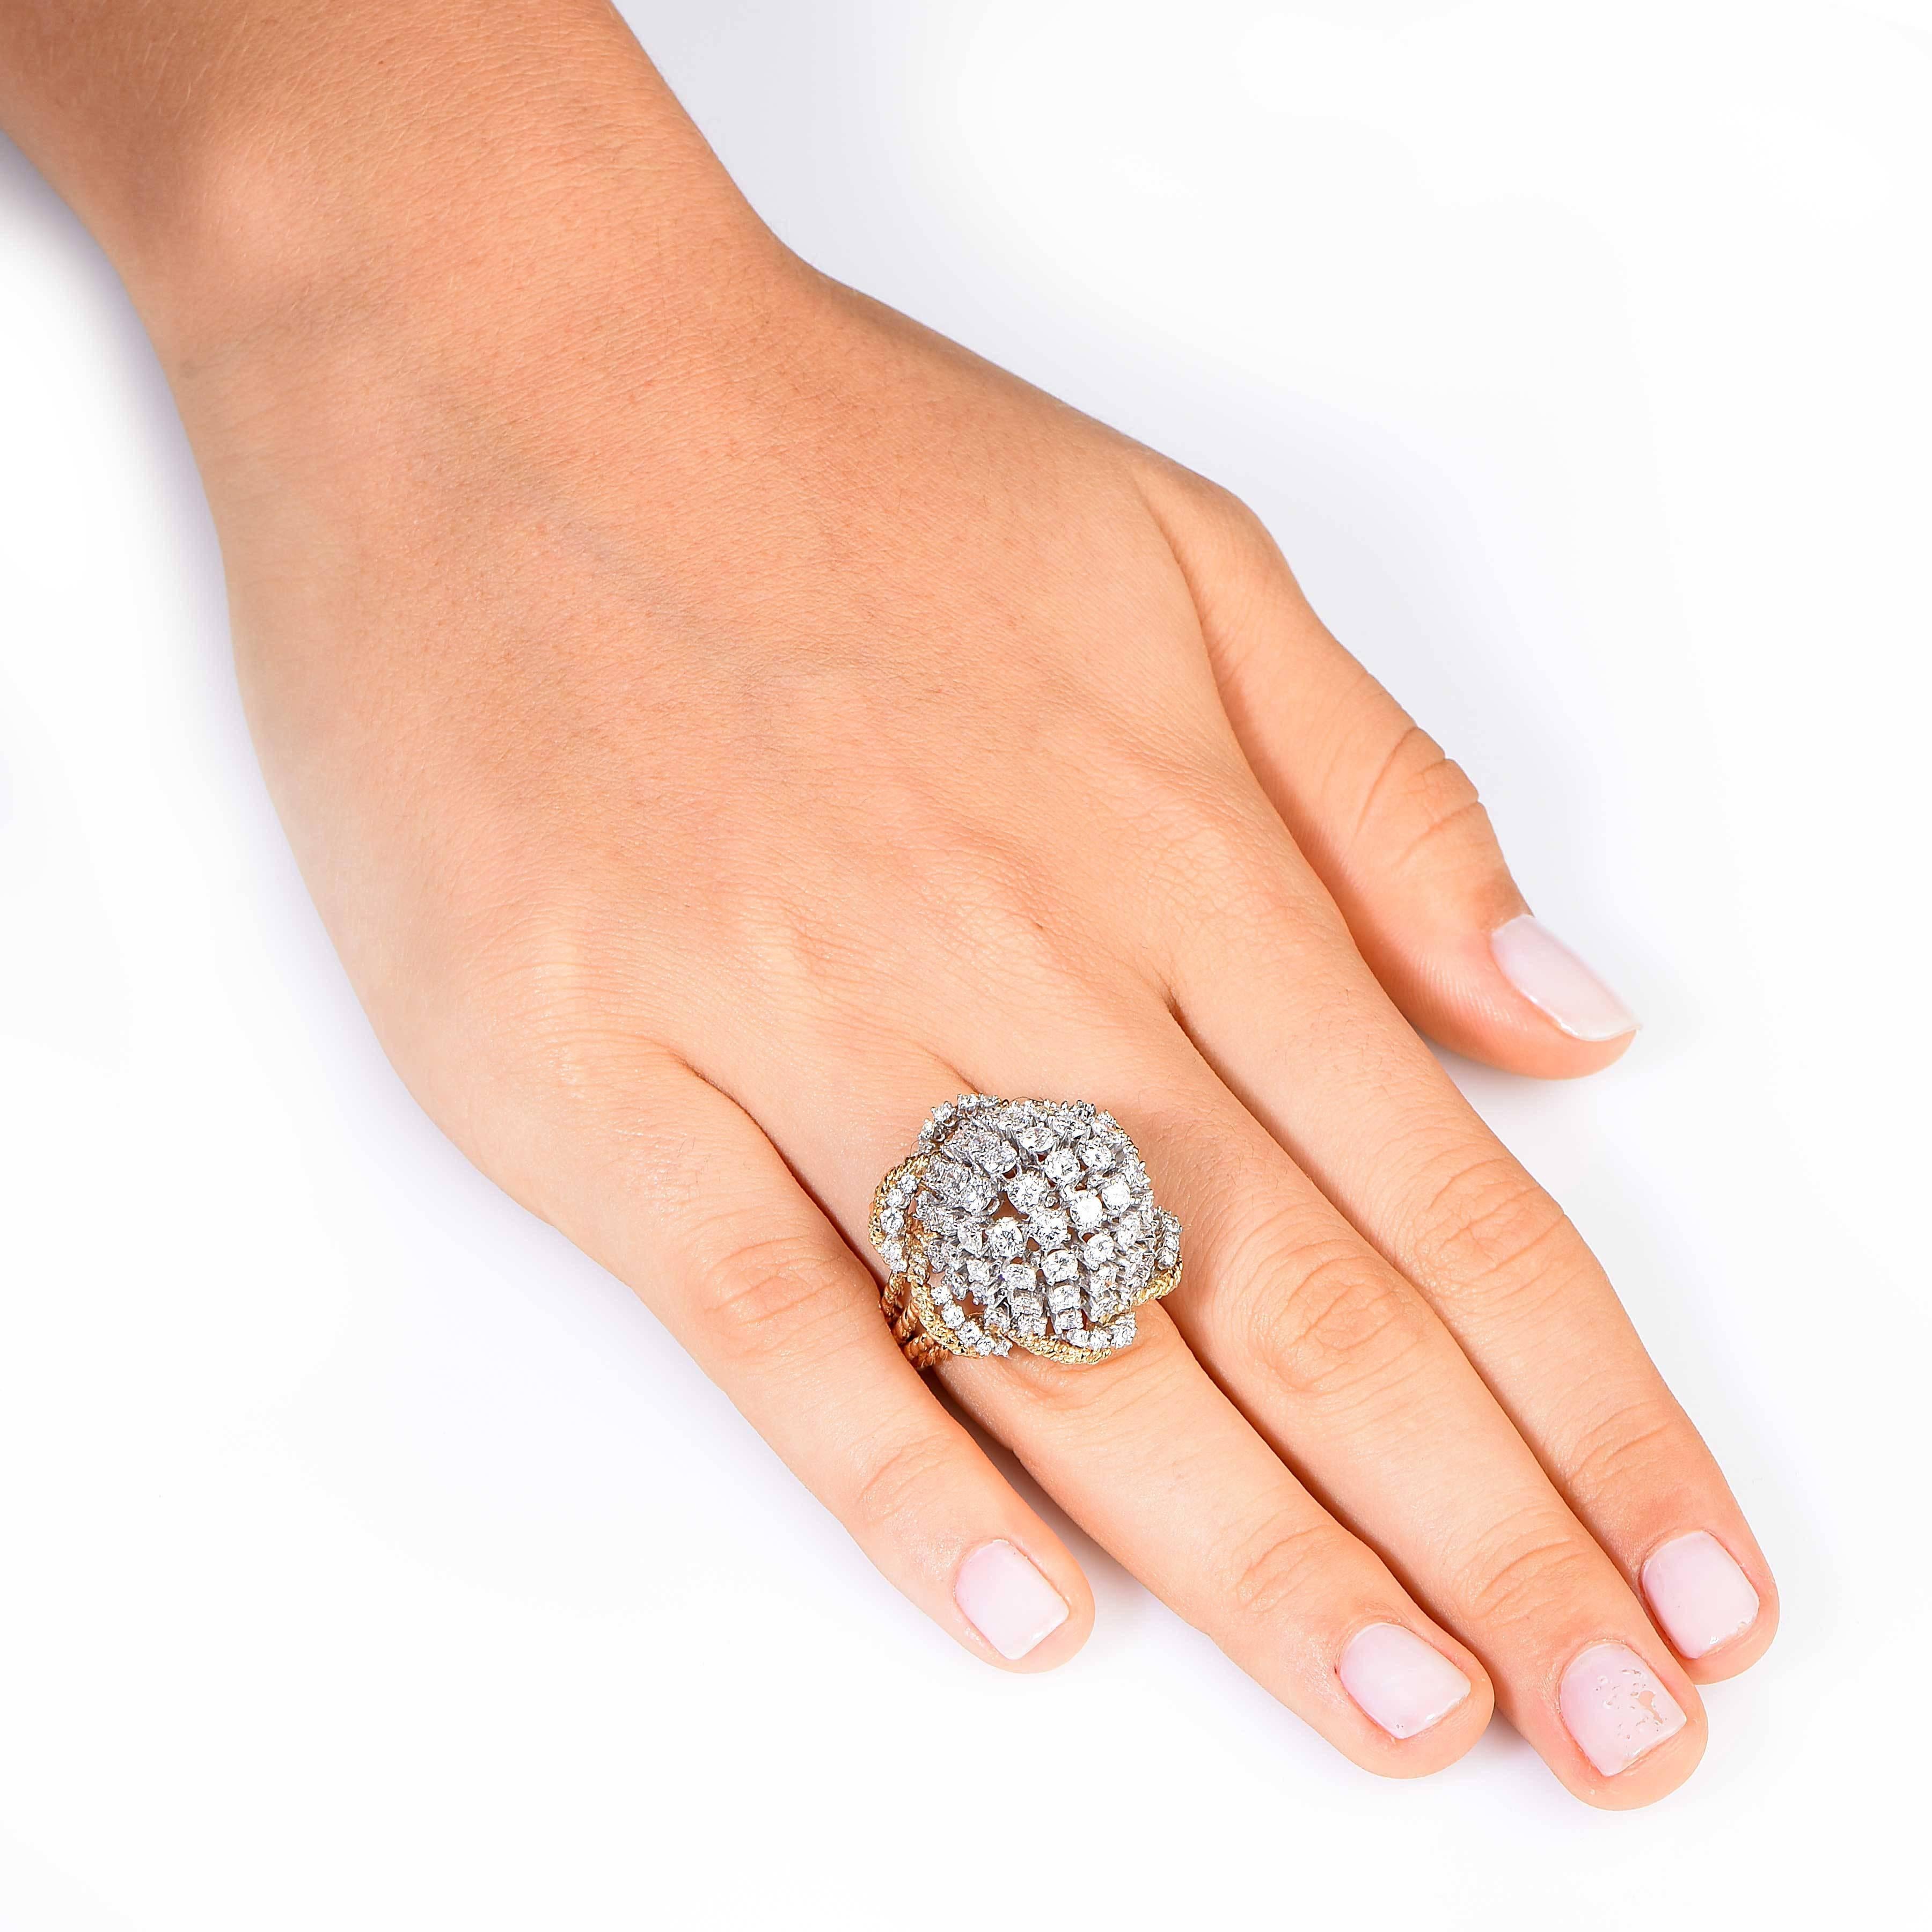 Bombe Style dome ring featuring 90 round brilliant cut diamonds with an estimated total weight of 7.8 carats. The diamonds are prong set in platinum. The body of the ring features a rope design.
Ring Size: 6 3/4

Metal Type: 18 Karat Yellow Gold and